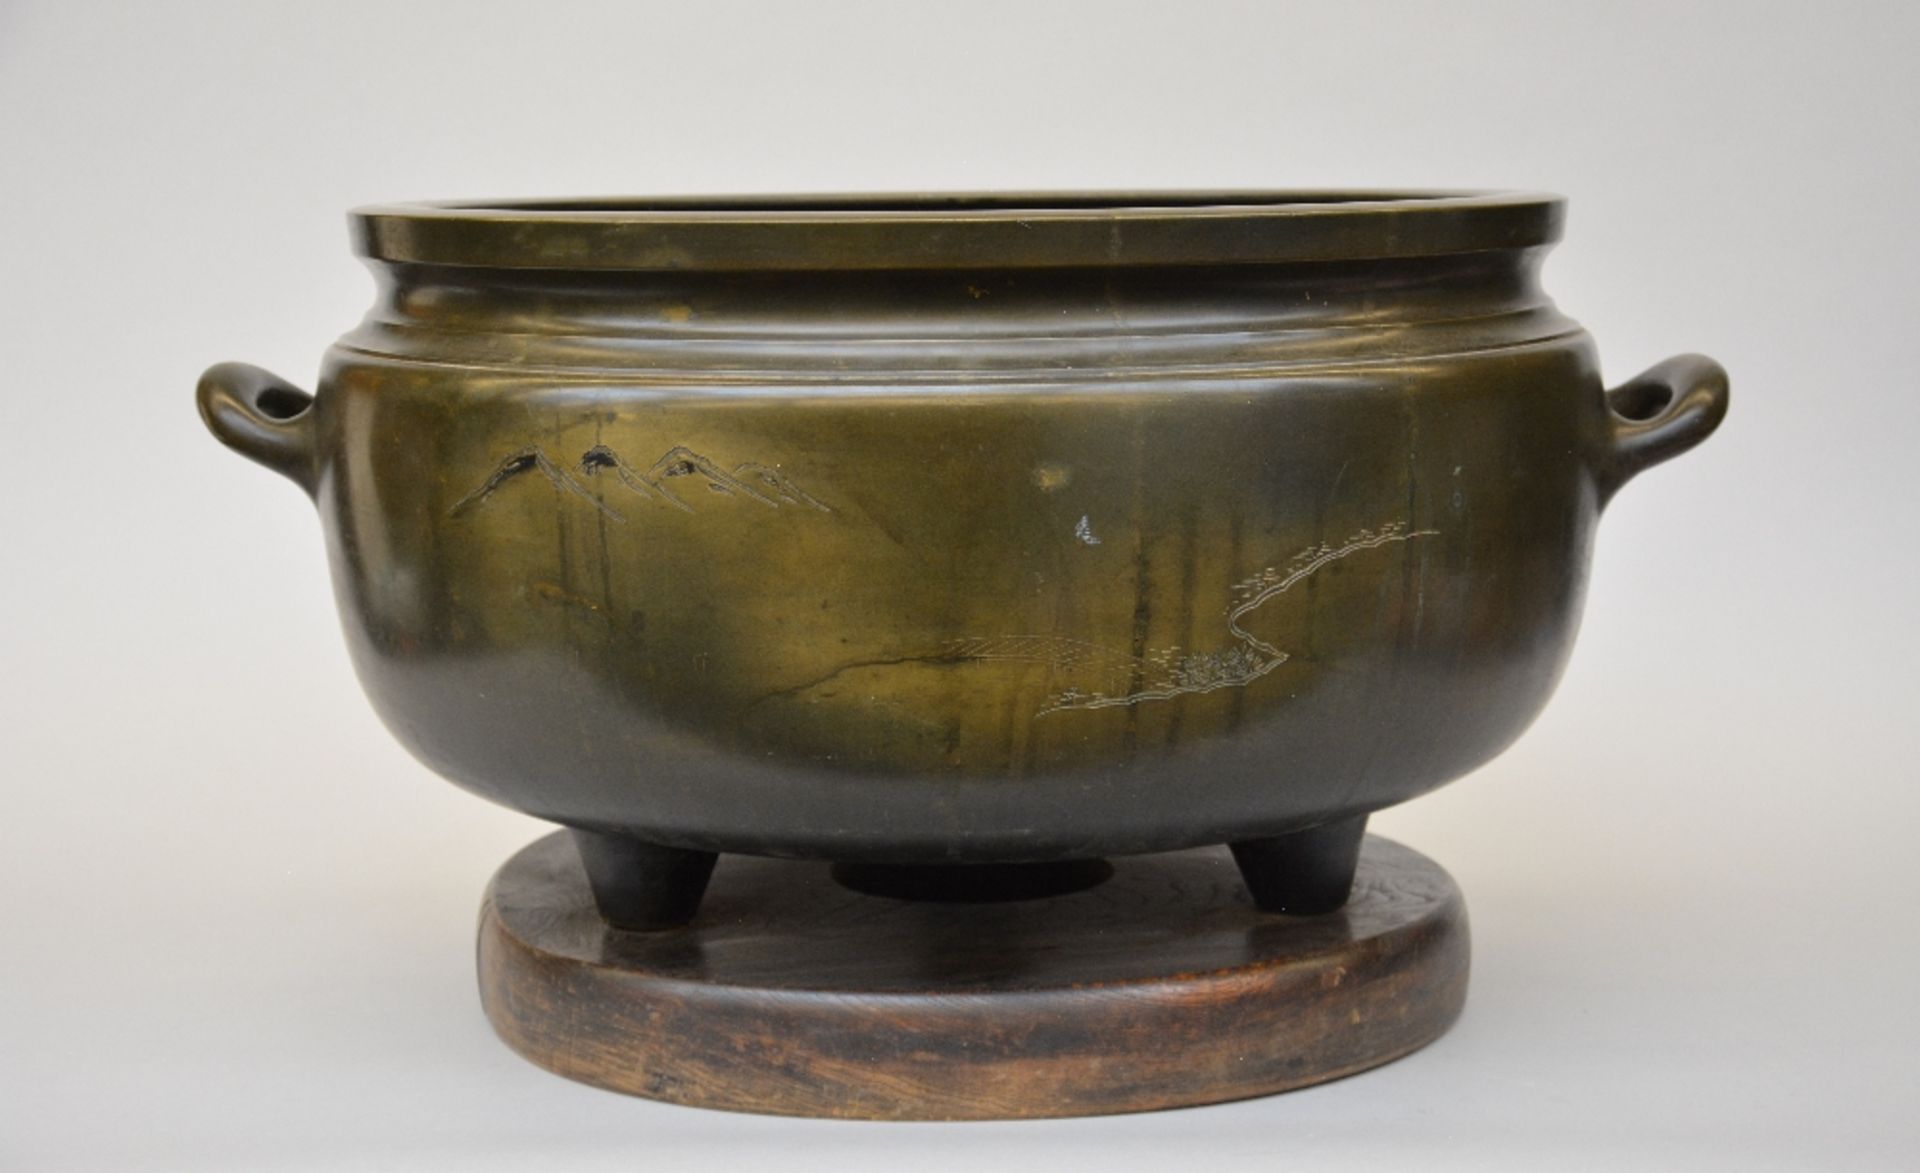 An exceptional Japanese bronze incense burner on a wooden base, late Edo period, H 36,5 - W 70 cm ( - Image 3 of 8